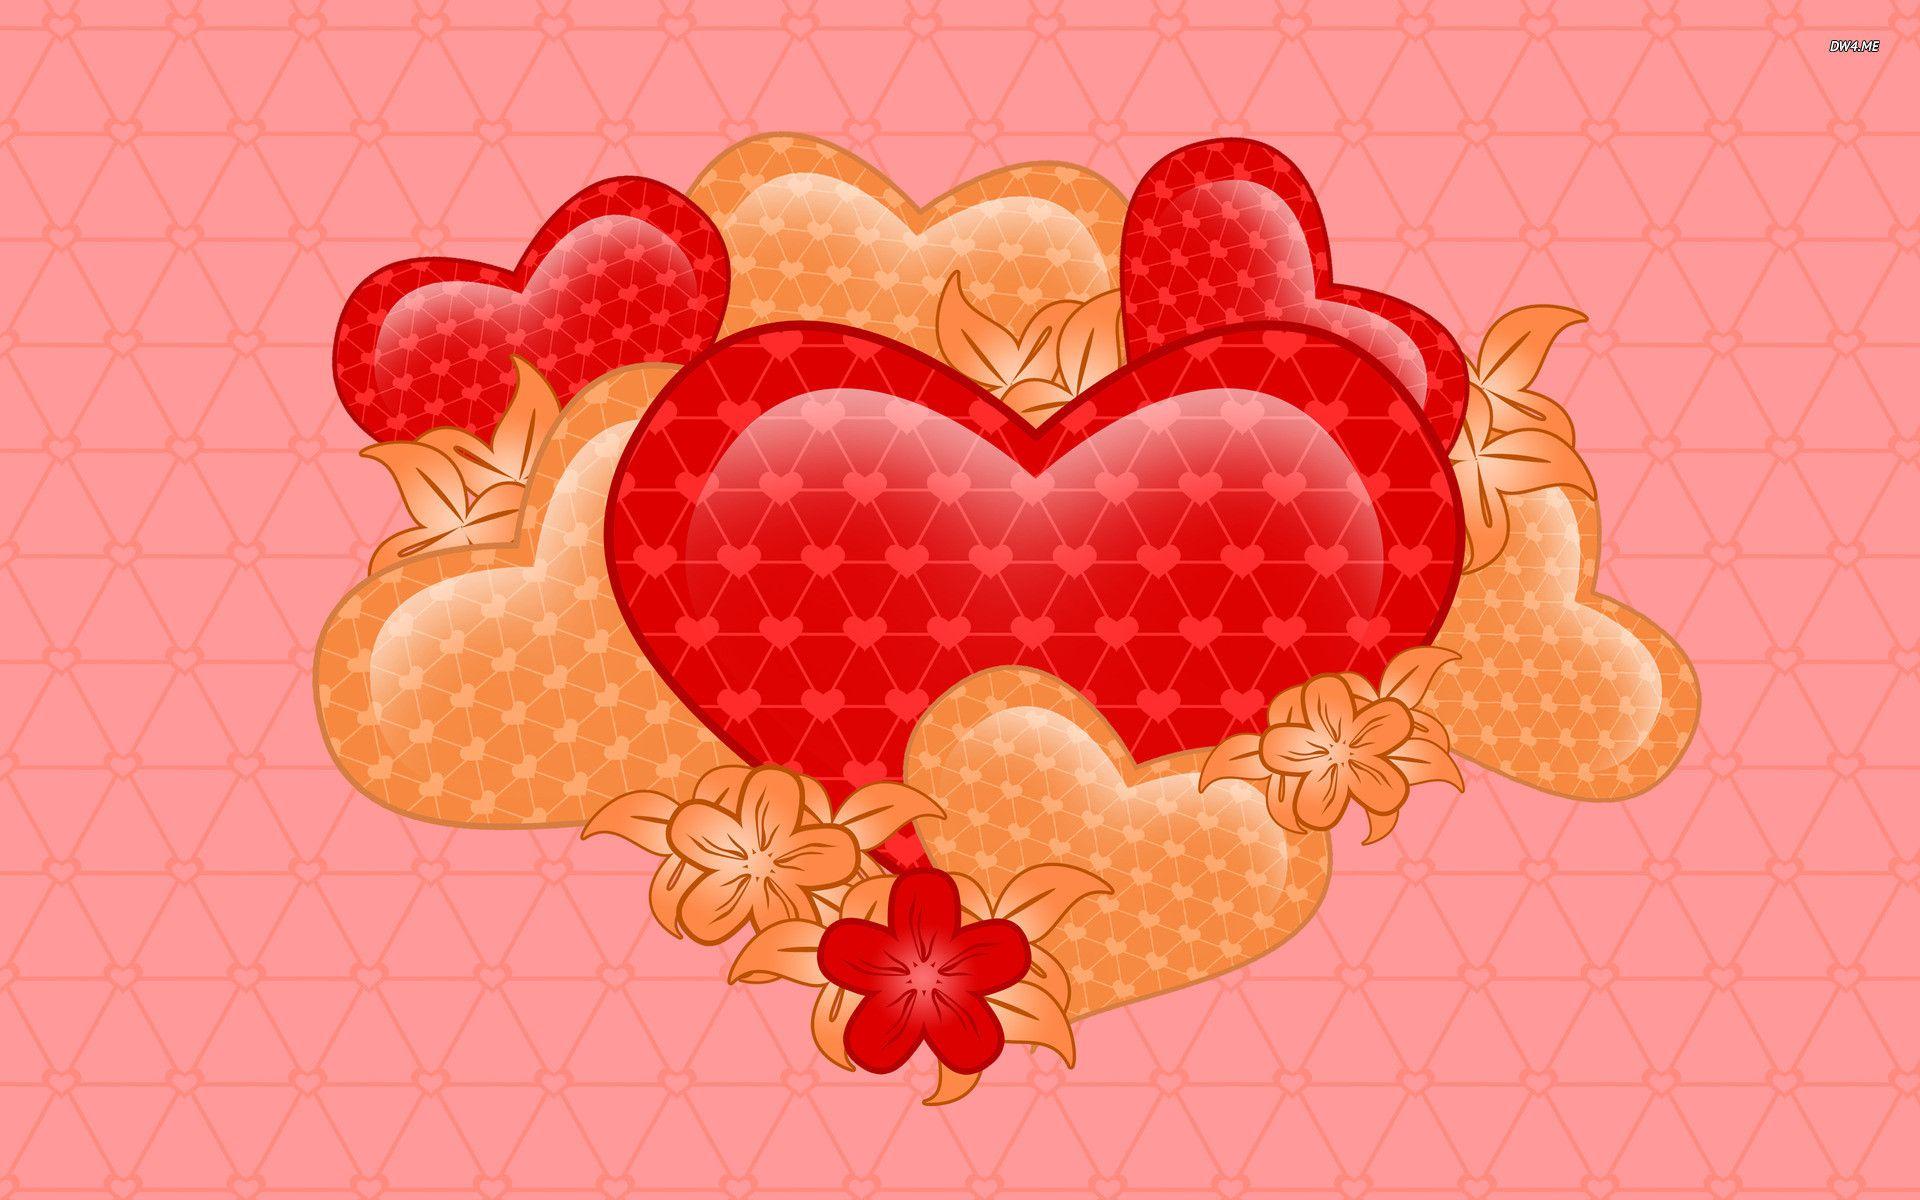 Hearts and flowers wallpaper wallpaper - #